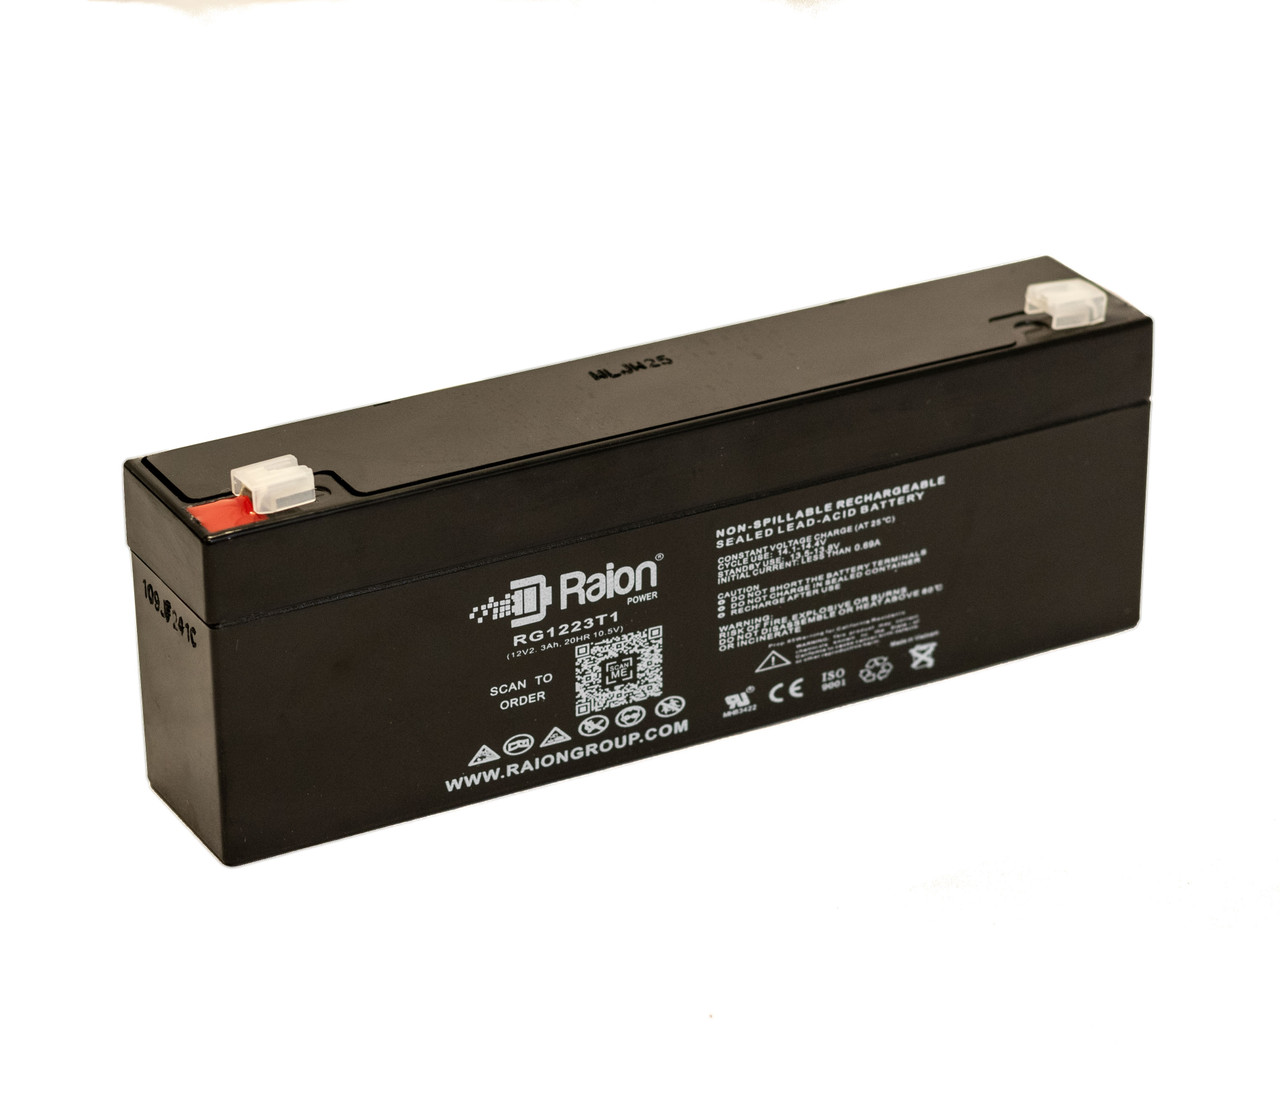 Raion Power RG1223T1 Replacement Battery for Novametrix Medical Systems 515 Pulse Oximeter